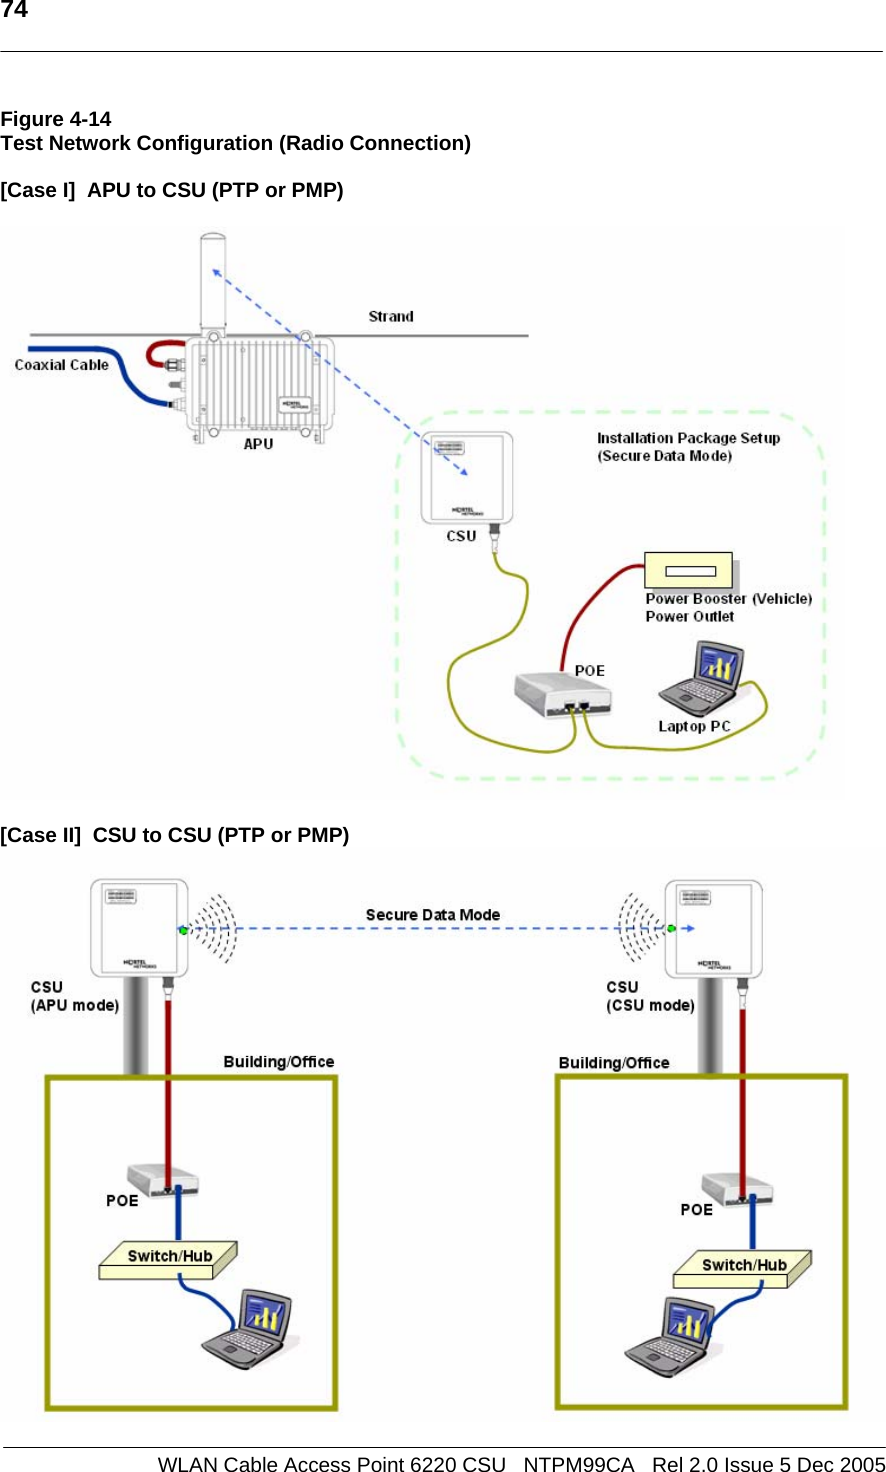   74  WLAN Cable Access Point 6220 CSU   NTPM99CA   Rel 2.0 Issue 5 Dec 2005 Figure 4-14 Test Network Configuration (Radio Connection)  [Case I]  APU to CSU (PTP or PMP)    [Case II]  CSU to CSU (PTP or PMP)  